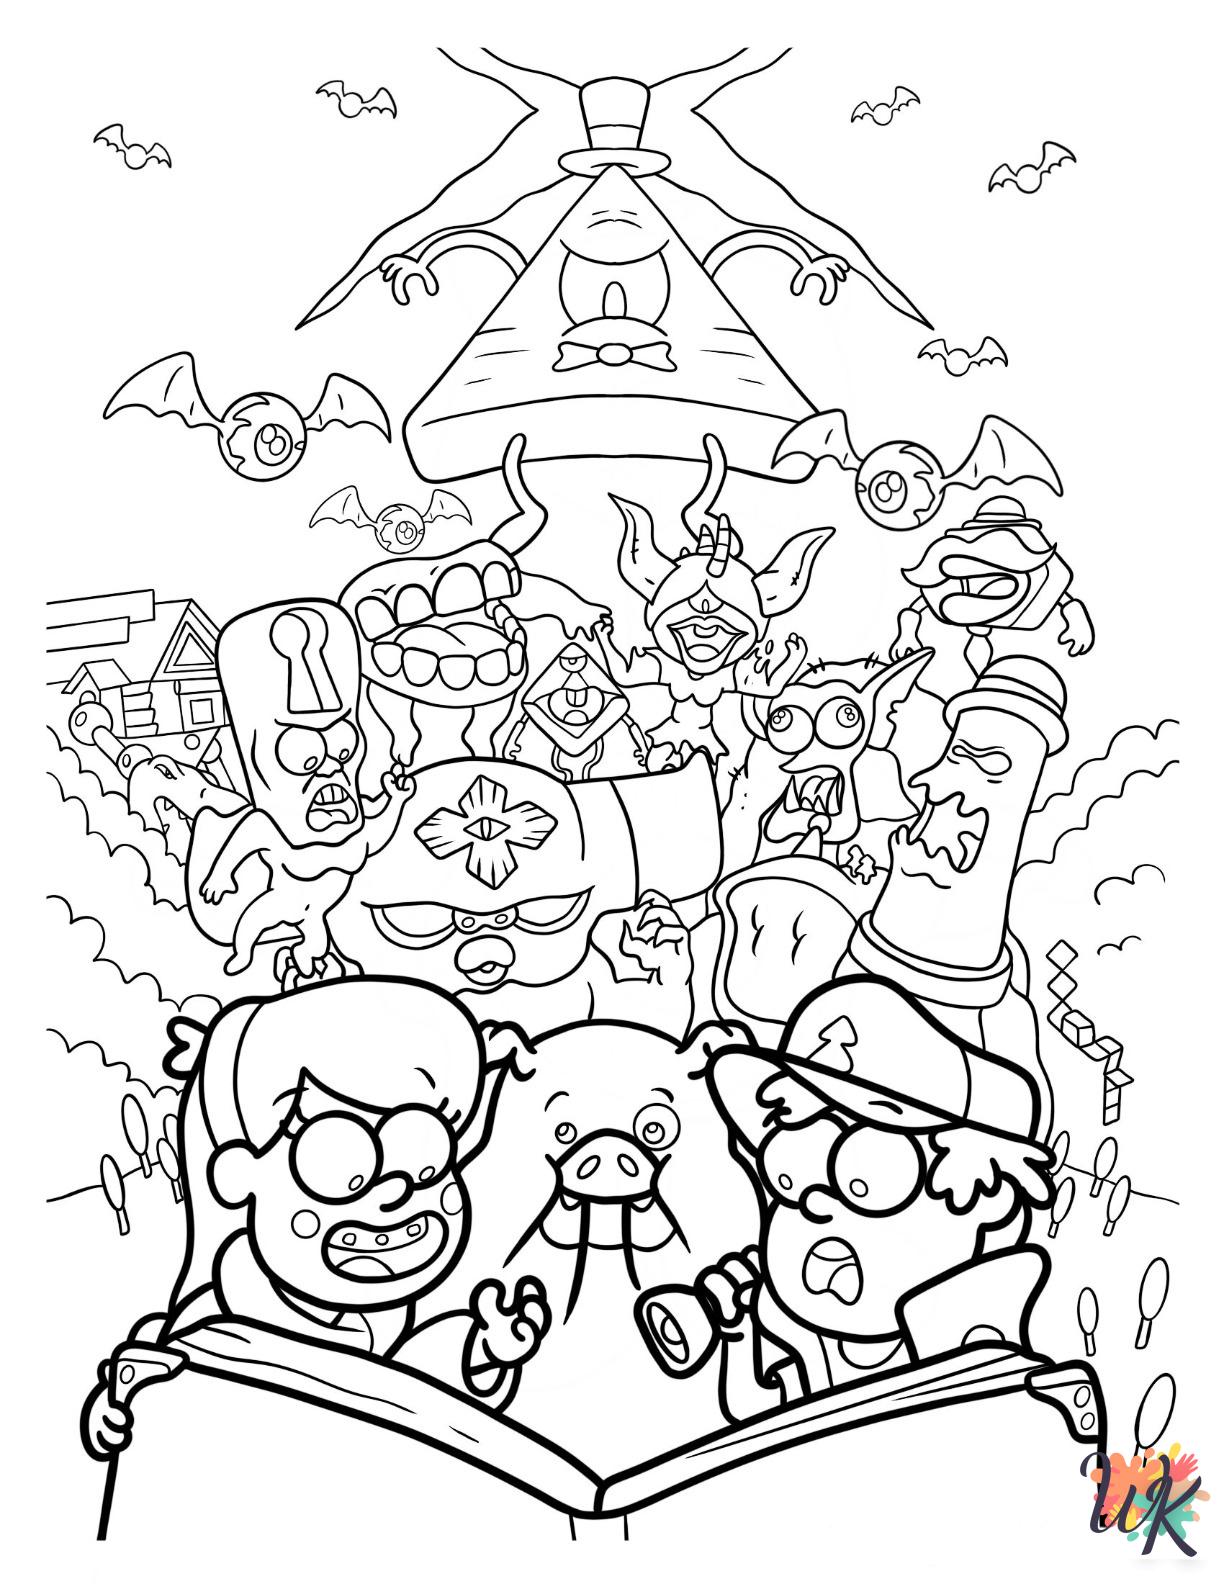 Gravity Falls Coloring Pages 5